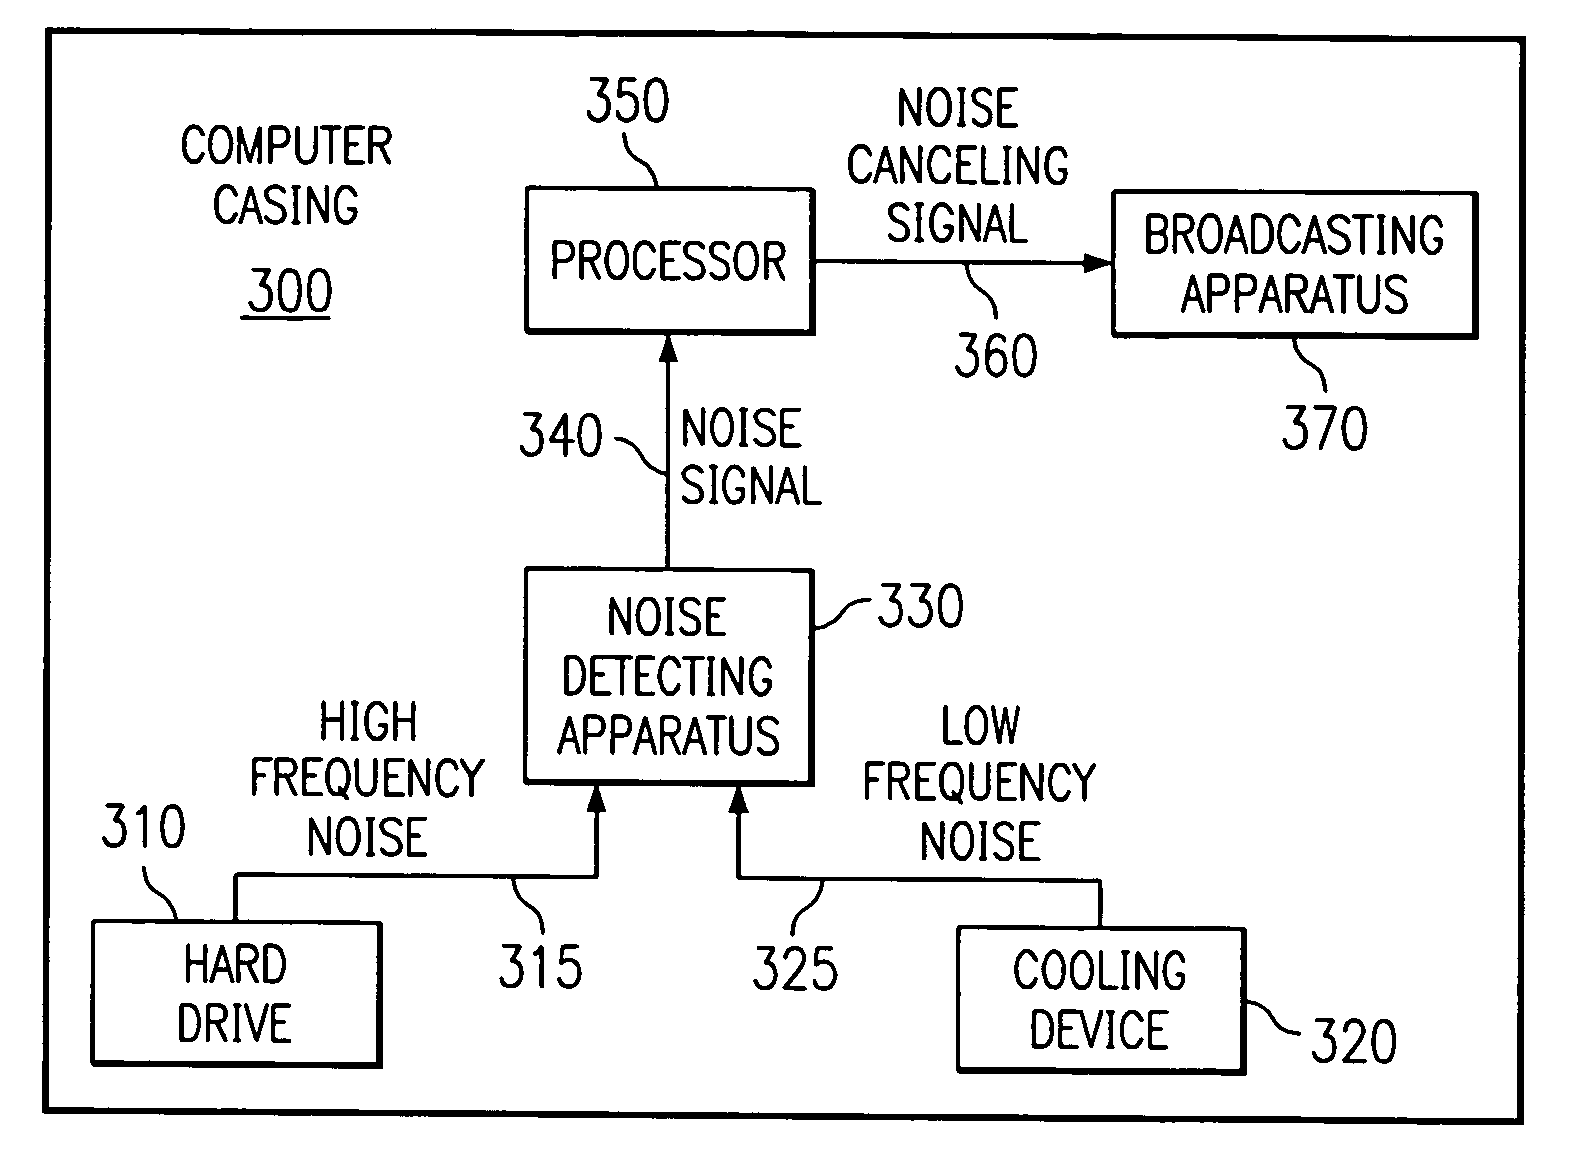 Computer-based onboard noise suppression devices with remote web-based management features